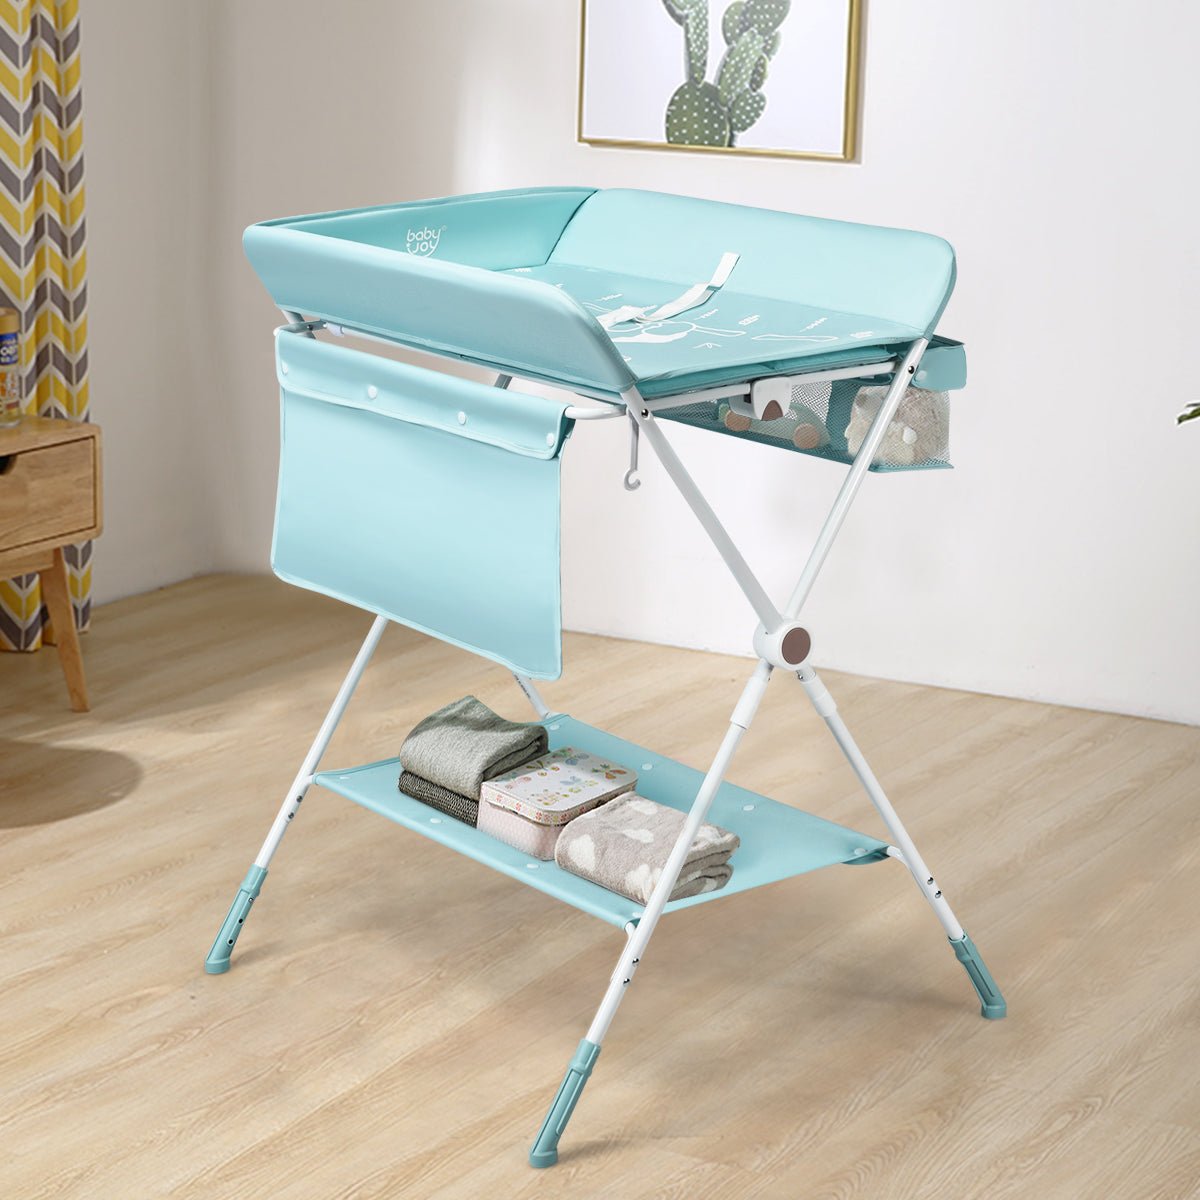 Innovative Diaper Changing Station - Adjustable Heights for Ultimate Comfort, Blue